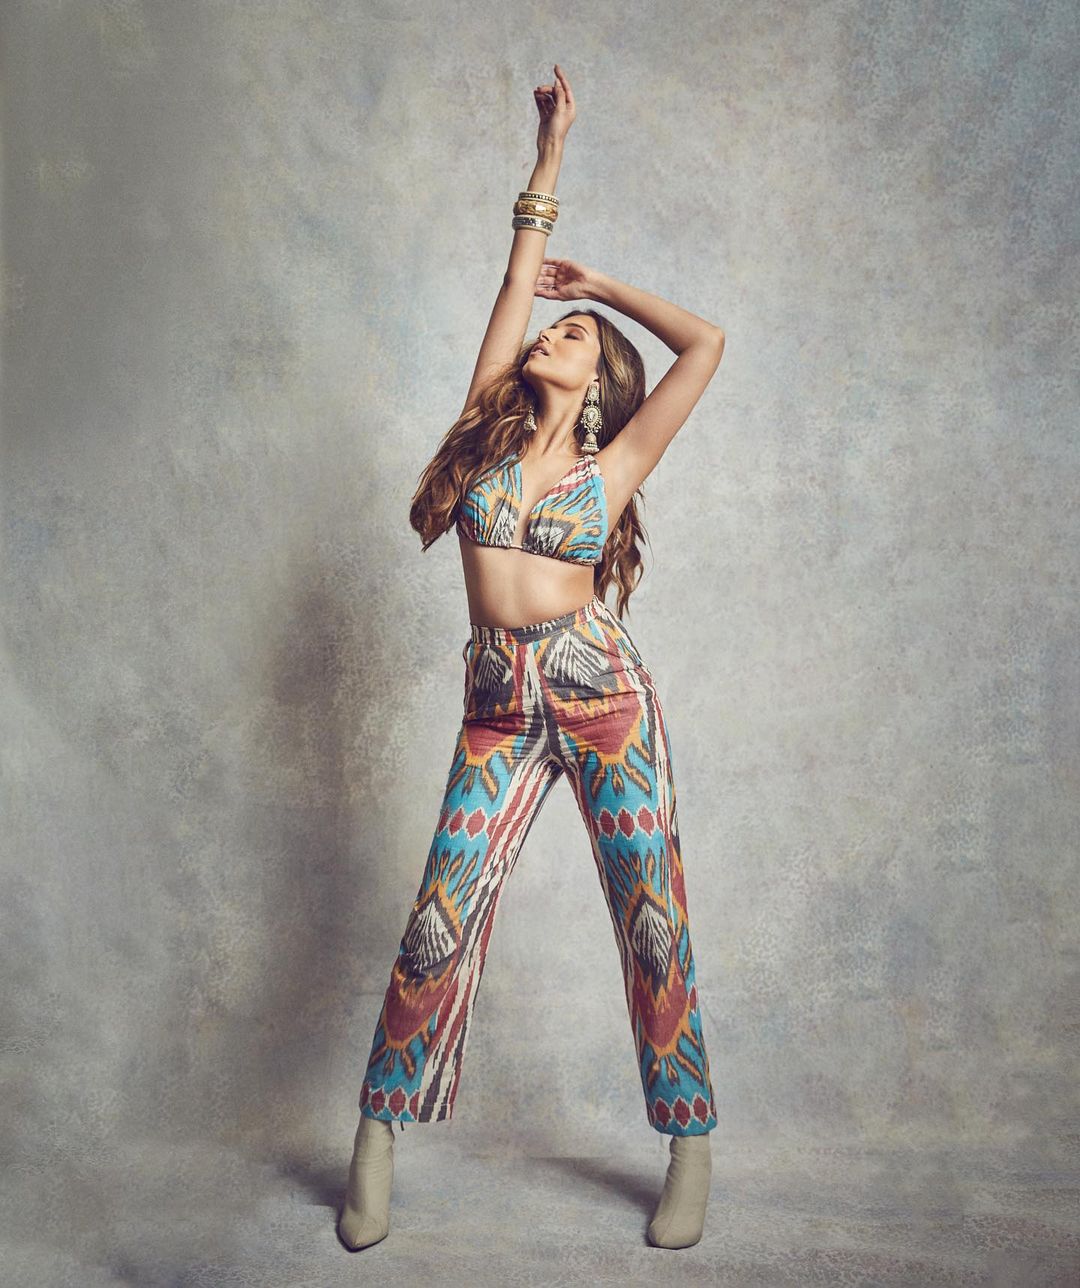 Tara Sutaria looks sexy in the colourful printed bralette and pants.